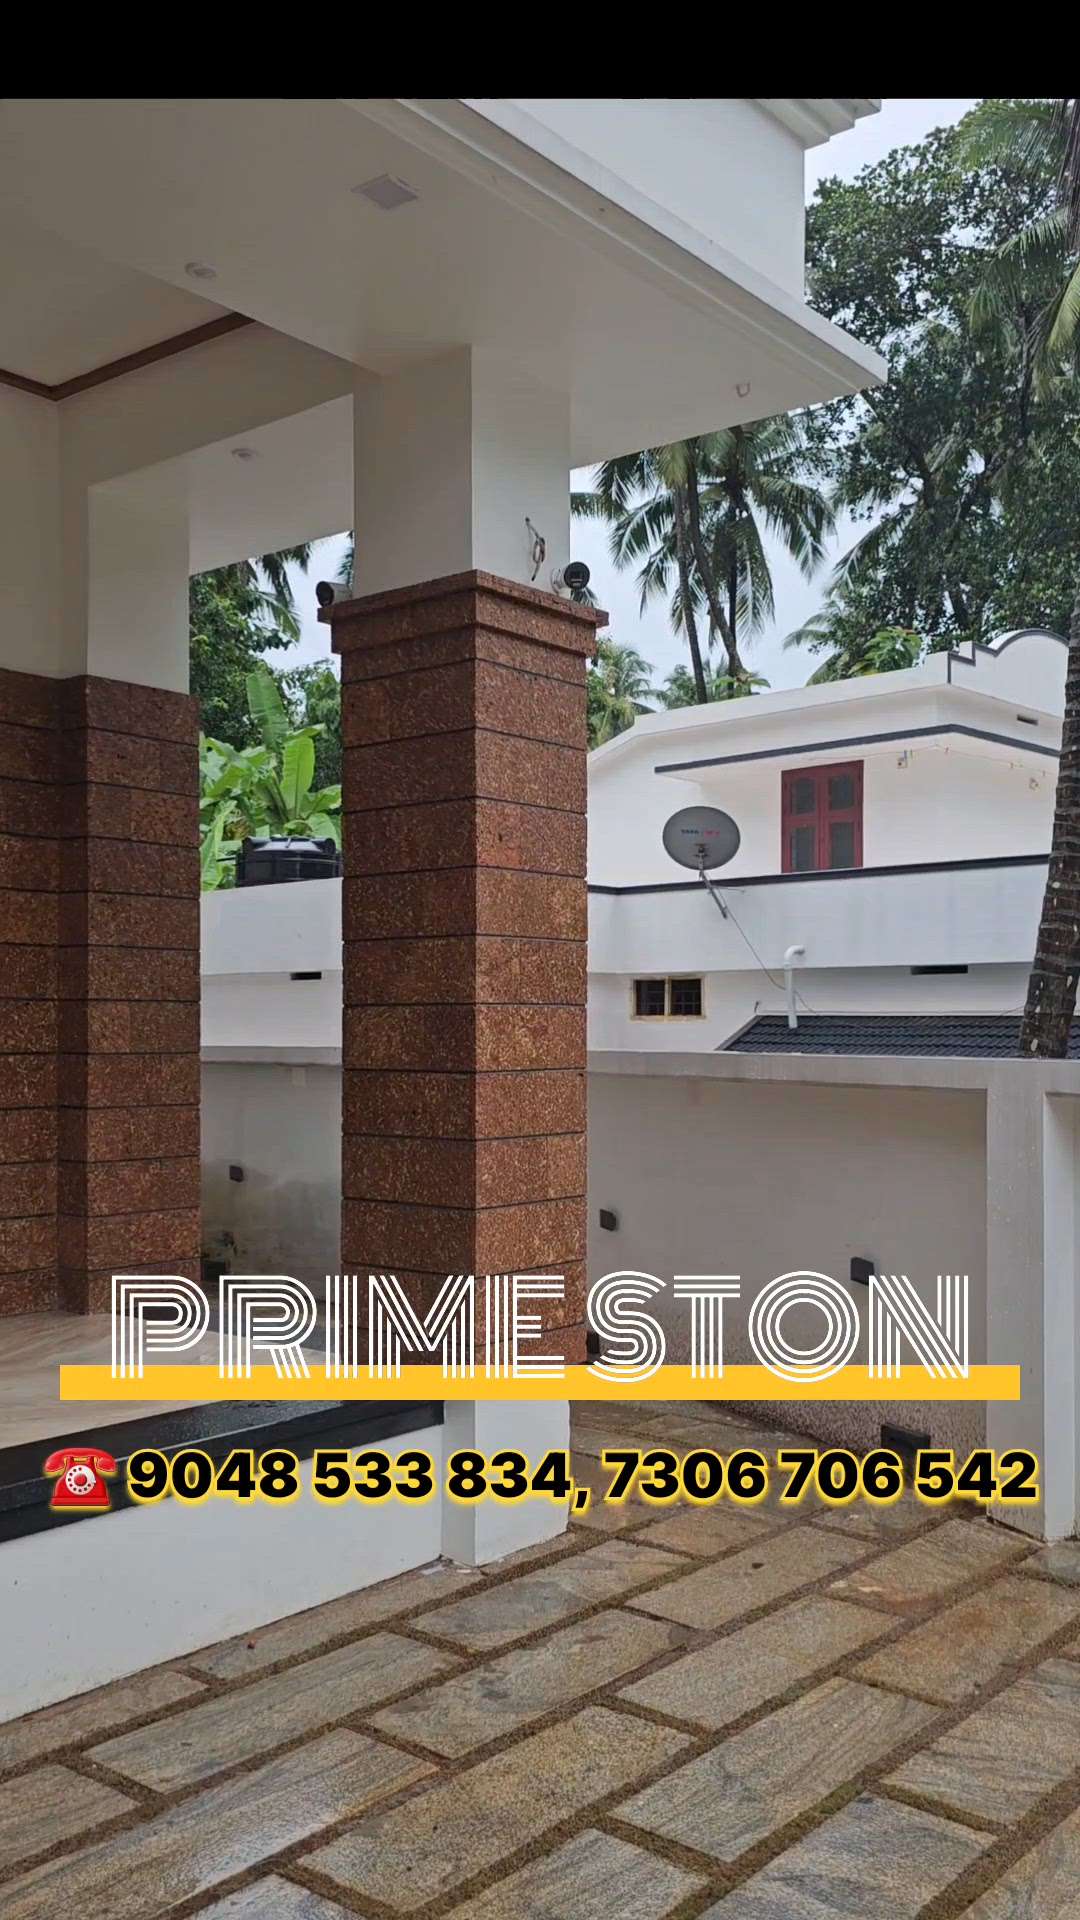 PRIME STON❤️ laterite cladding tiles# laterite slabs# laterite paving stones...
💚100% Natural Laterite Stone Products Manufacturer and laying contractor 💚
Our Service Available Allover India

Available Sizes....
12/6,12/7,15/9,18/9,21/9,24/9 inches 20 mm thickness...
Customized sizes also available...

Contact - 9188 007 961, 7012617121
              

primelaterite@gmail.com 
www.primestone.co. in
https://youtu.be/CtoUAPbgX08